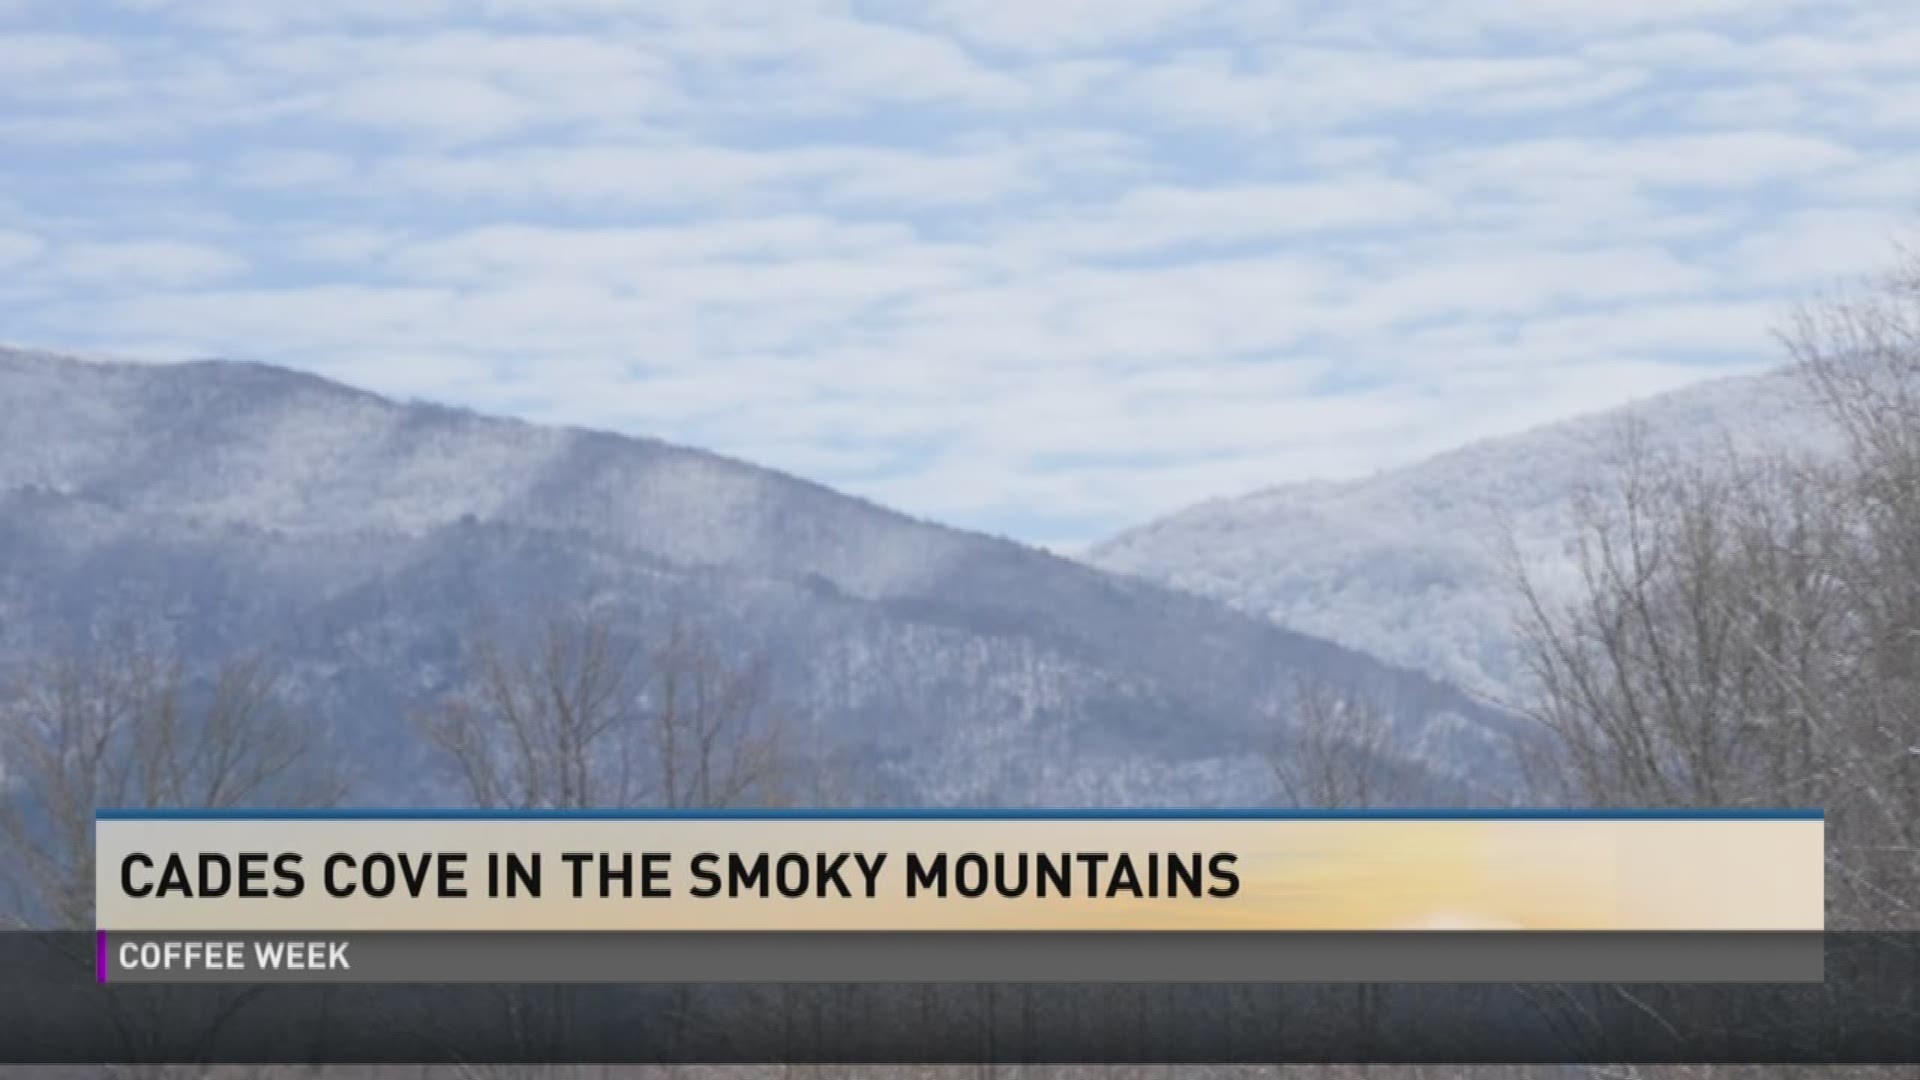 Cades Cove has some of the best views of the Great Smoky Mountains National Park.